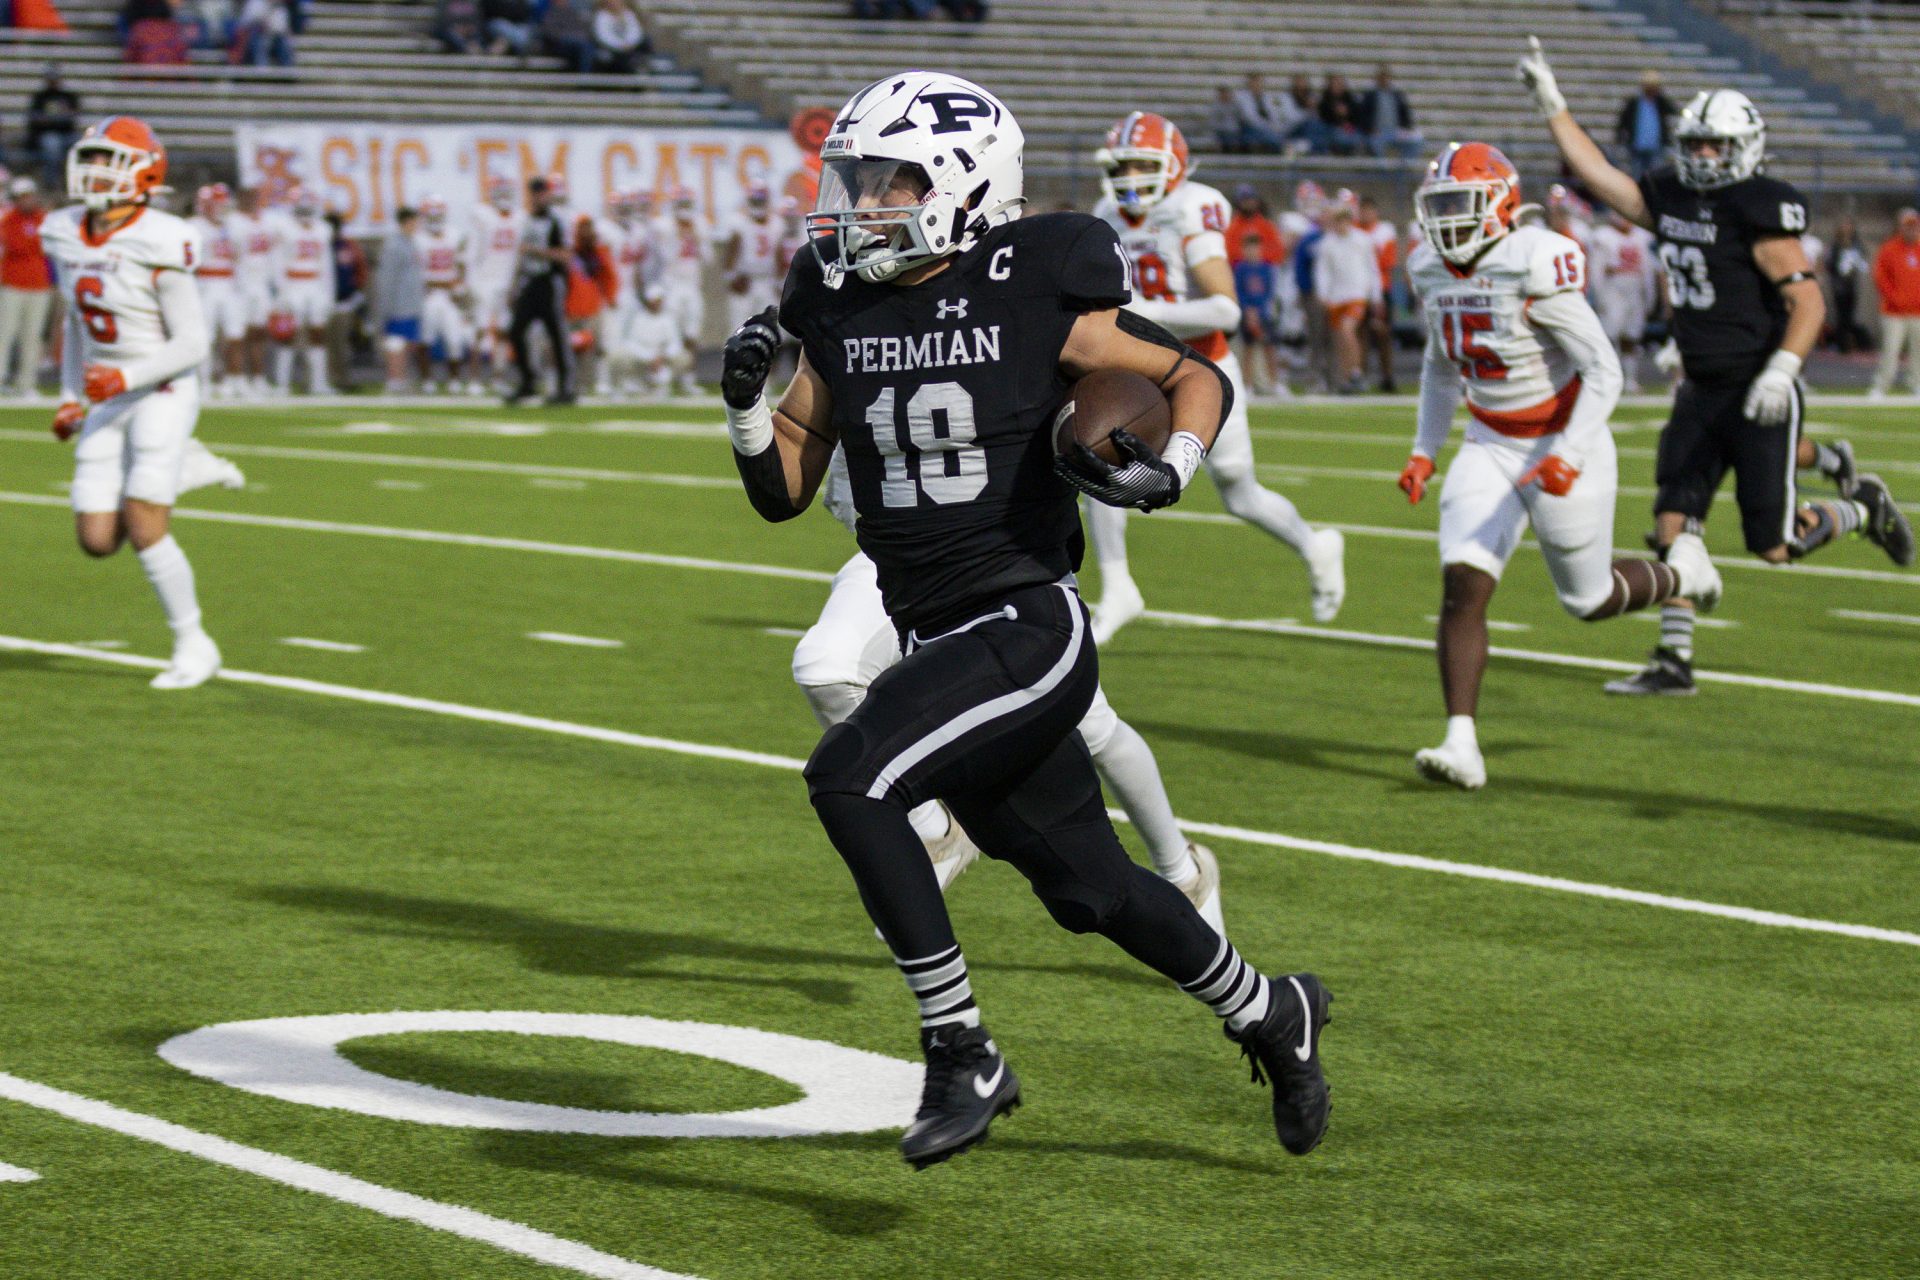 Permian football qualifies for state playoffs with win over Midland High